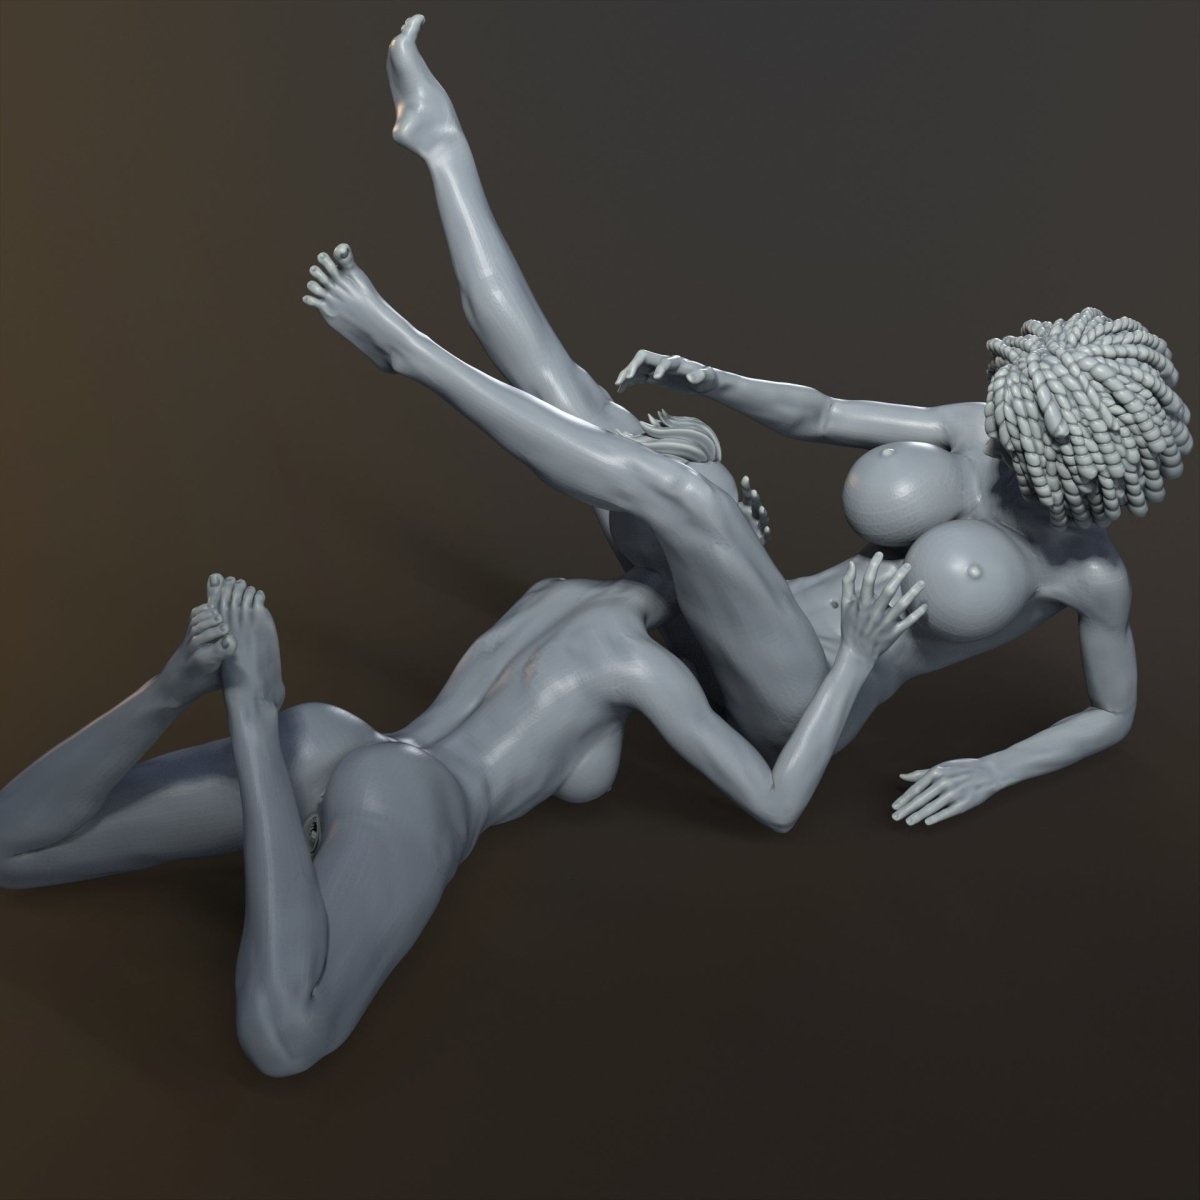 LESBIAN LOVE 2 Naked 3d Printed miniature Resin Collectables Statues & Figurines